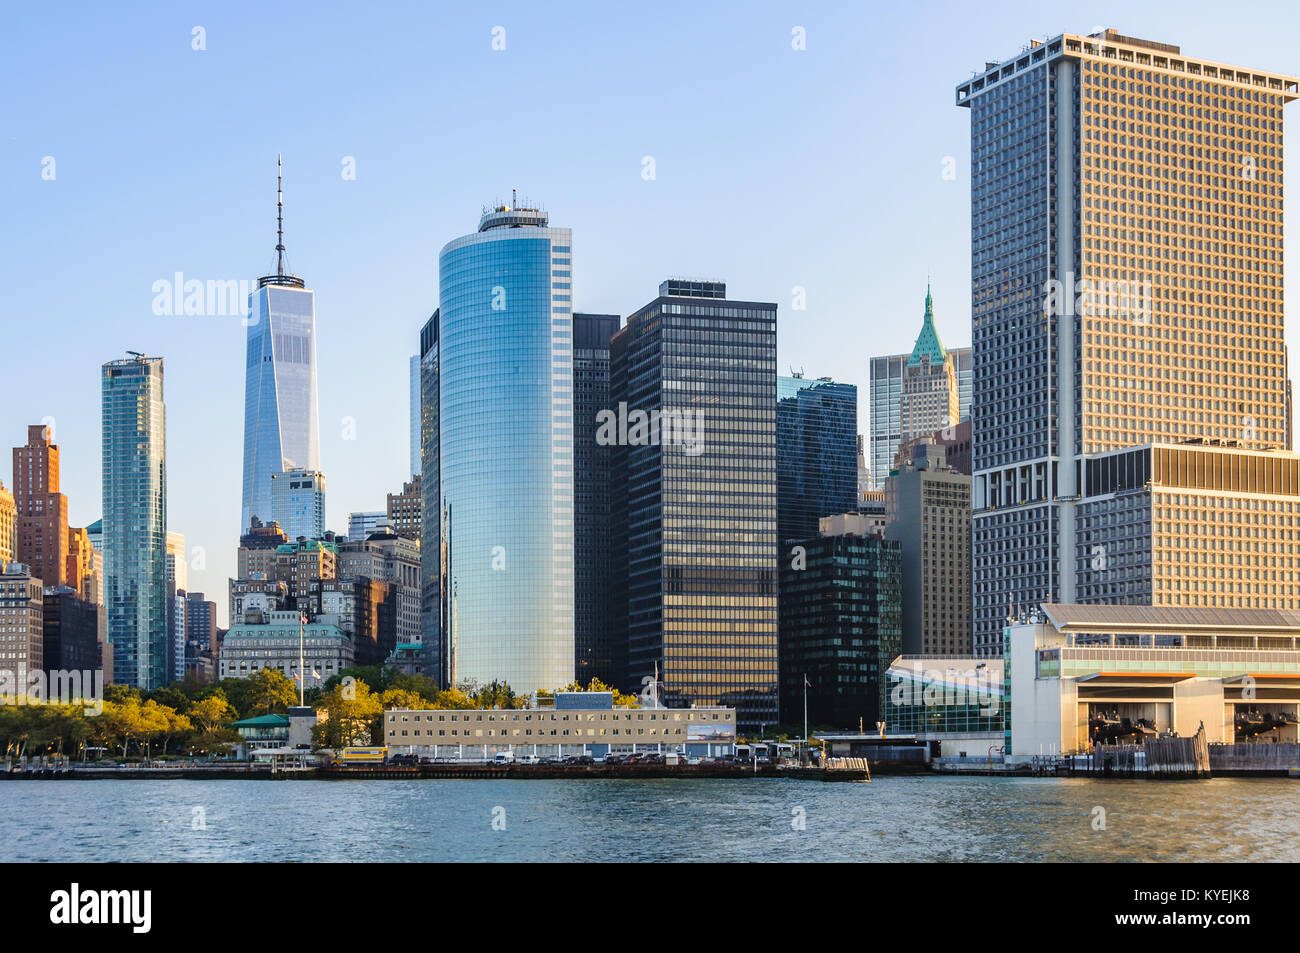 Manhattan Skyline just after sunrise as seen from the Staten Island ferry, New York, USA Stock Photo